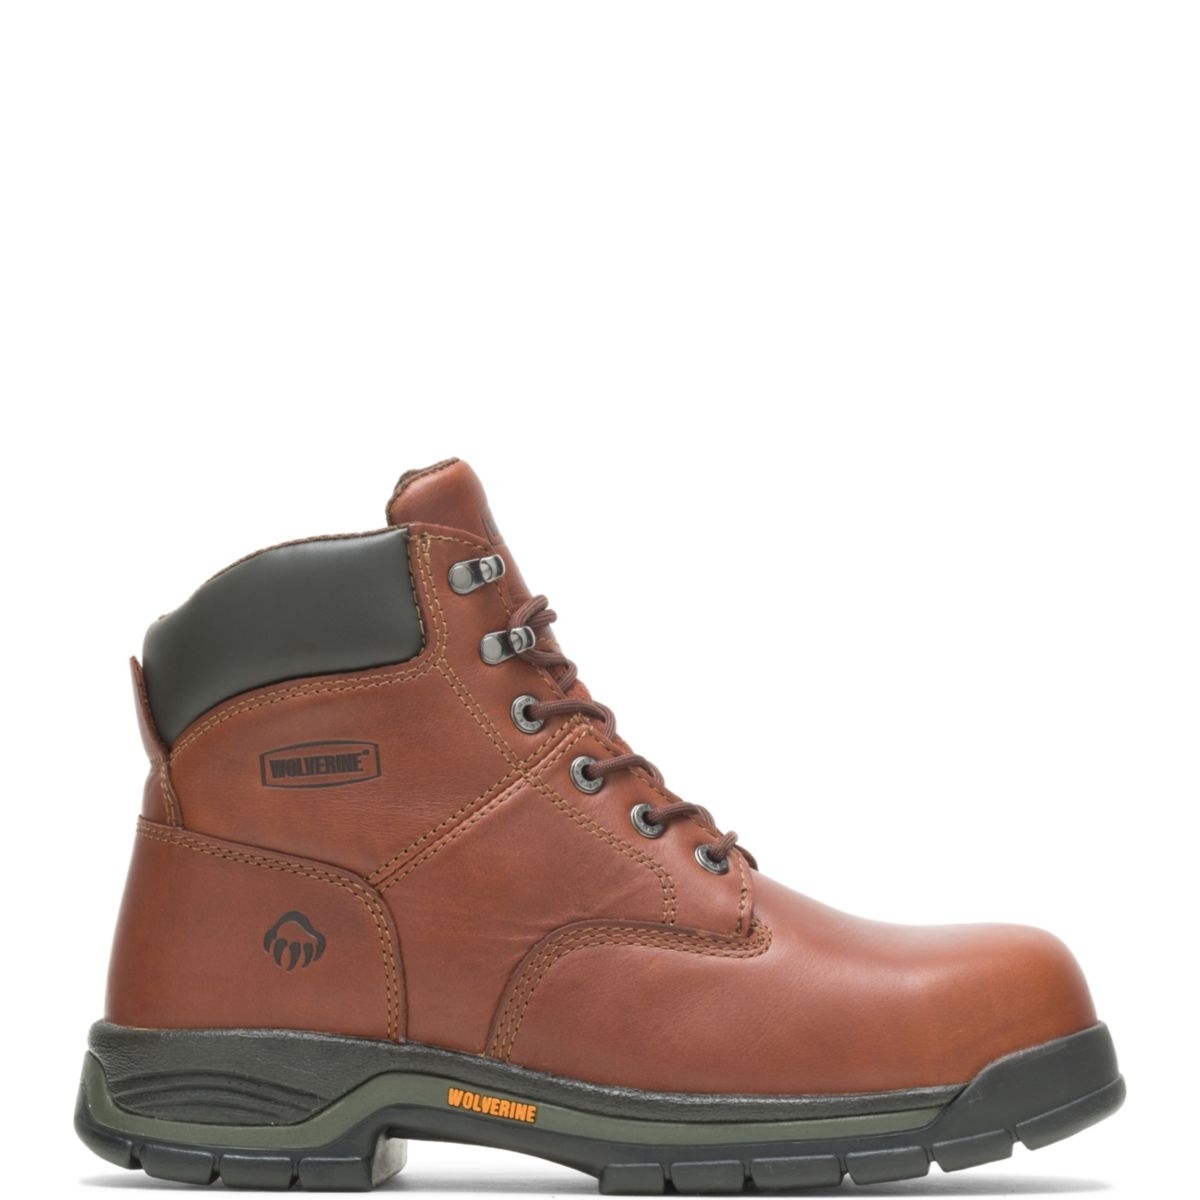 WOLVERINE Men's Harrison 6 Lace-Up SoftToe Work Boot Brown - W04906 Varies BROWN - BROWN, 7.5 X-Wide